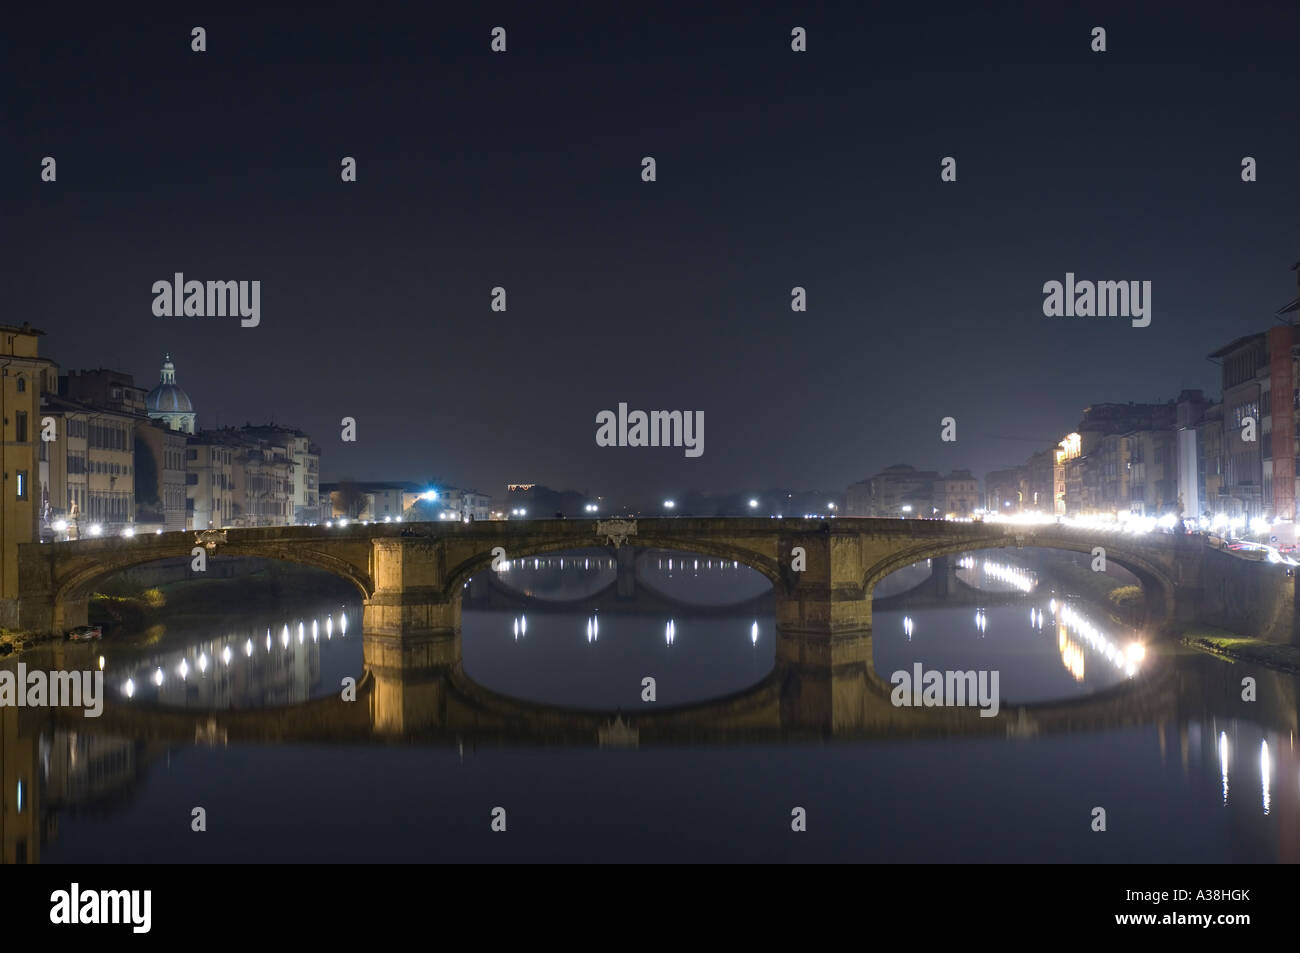 A view of the Ponte Santa Trinita (bridge) reflected in the calm water of the Arno river in Florence at night. Stock Photo